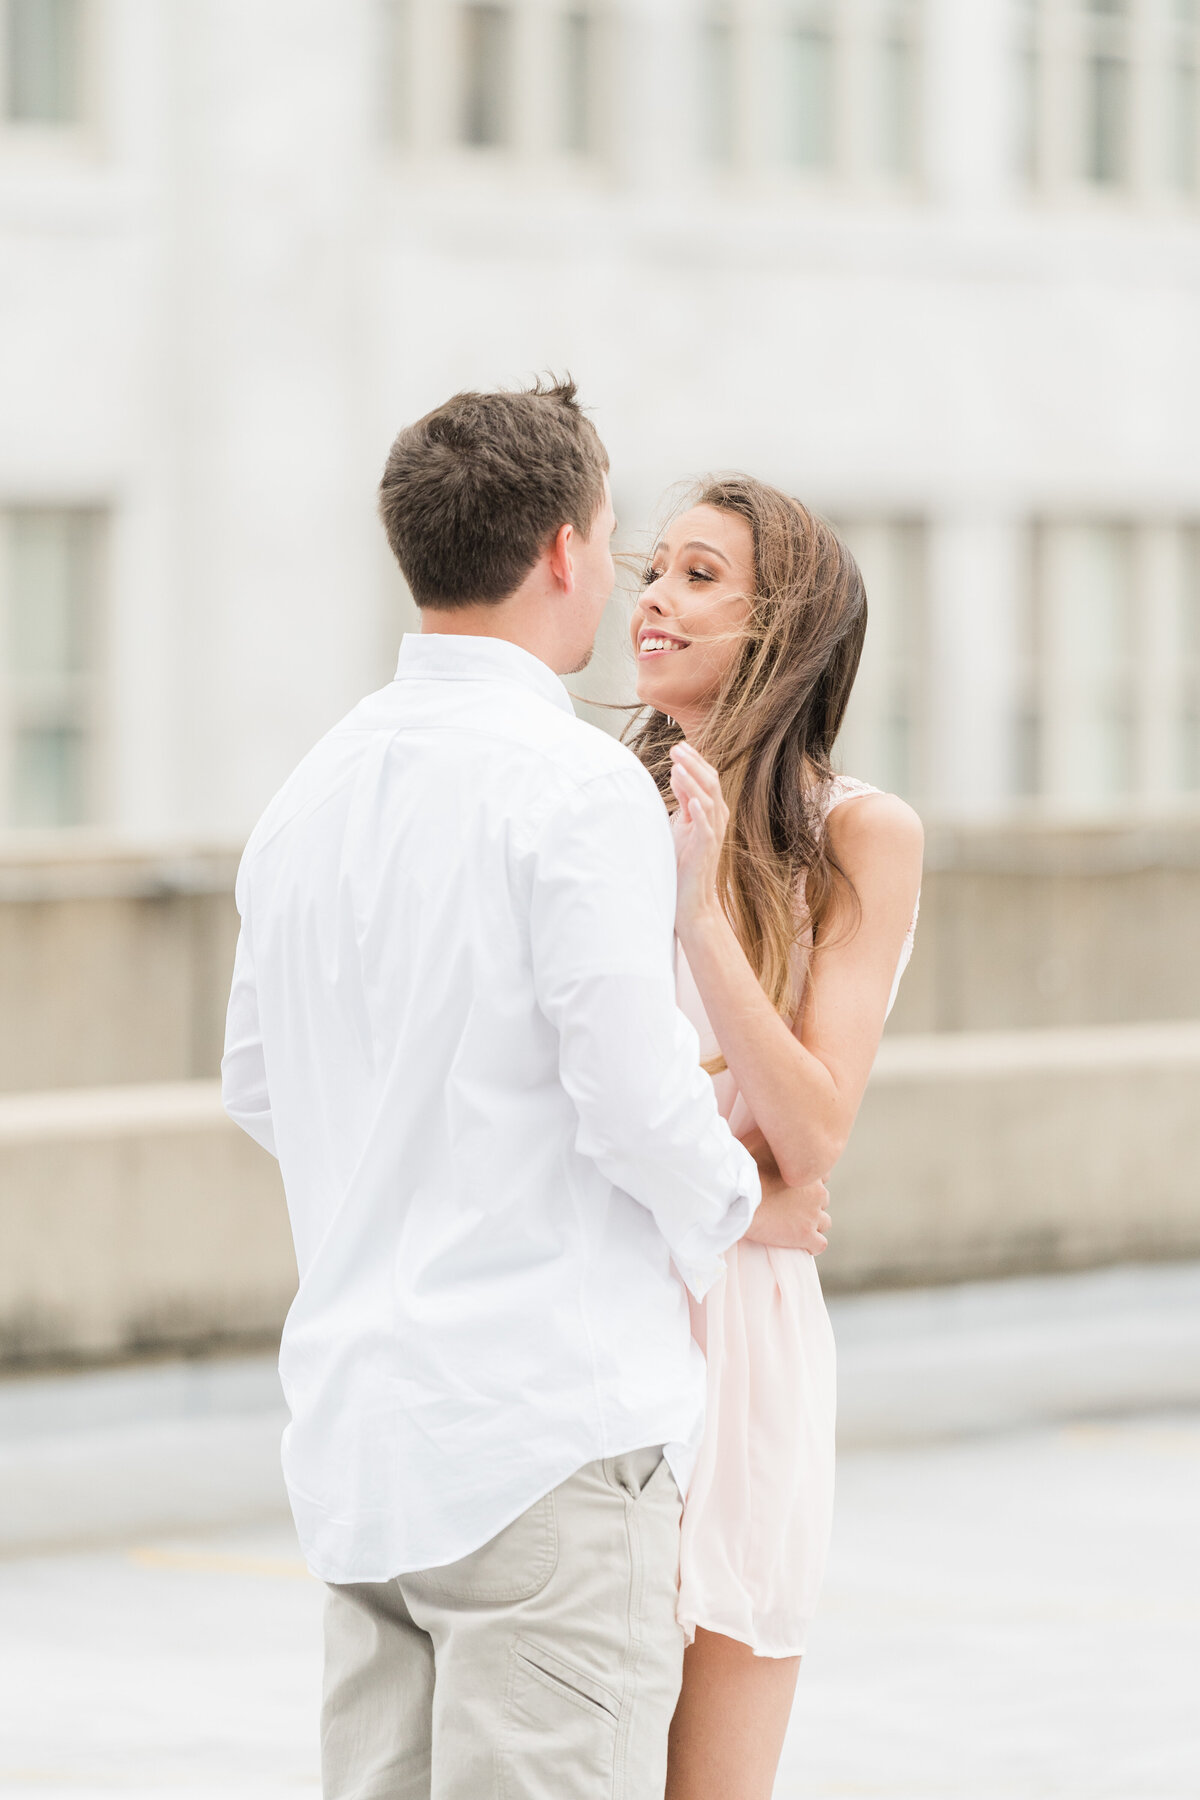 Engagement photoshoot on a rooftop in Alabama